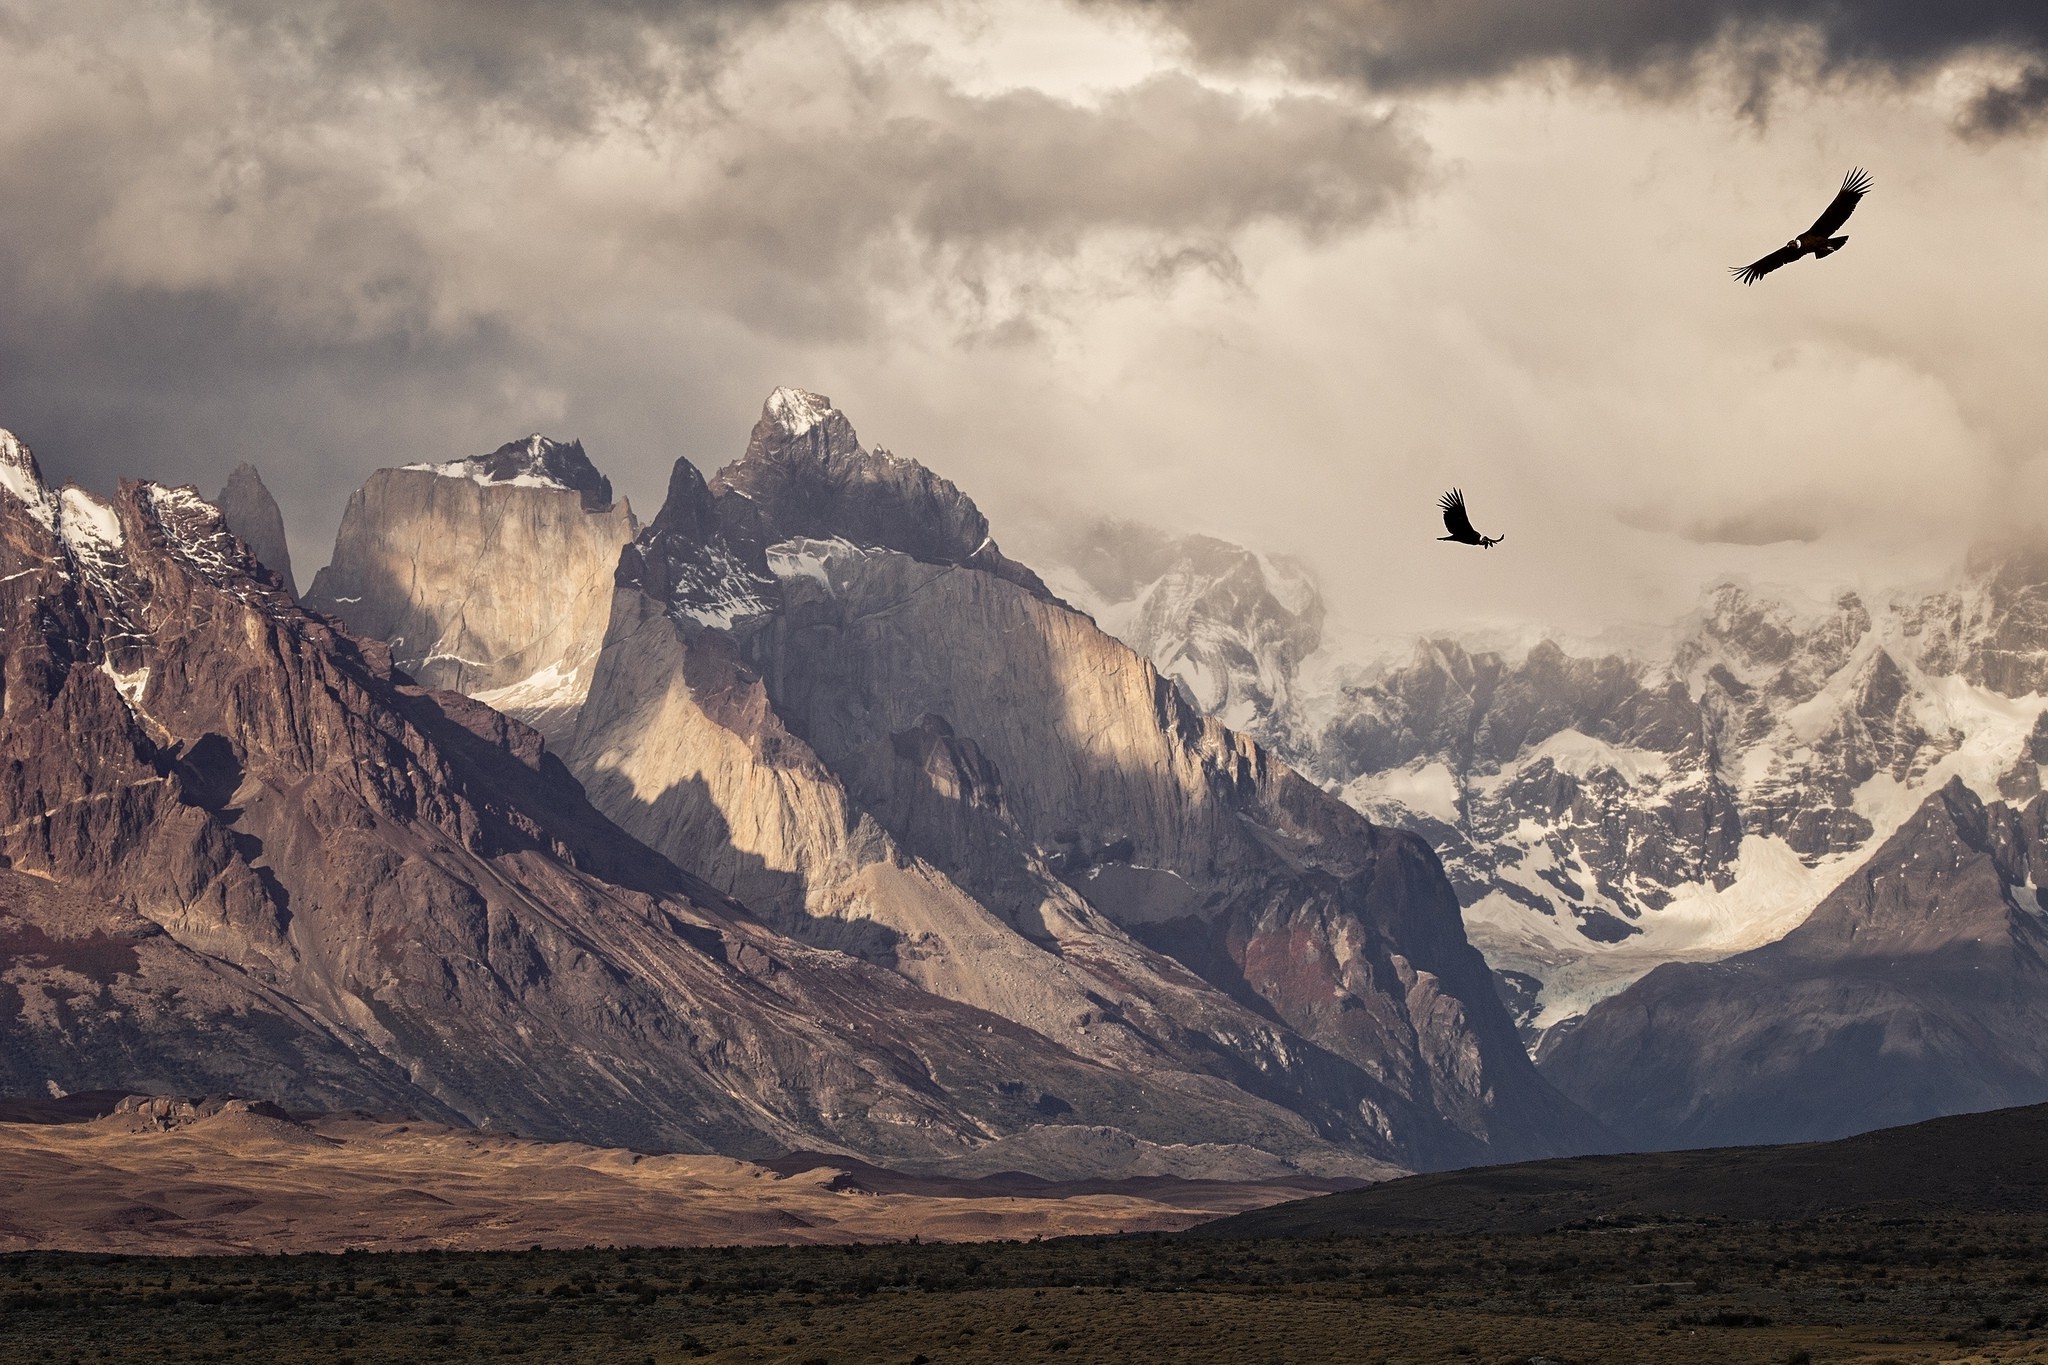 nature, Photography, Landscape, Birds, Condors, Flying, Mountains, Snowy Peak, Morning, Sunlight, Torres Del Paine, National Park, Patagonia, Chile Wallpaper